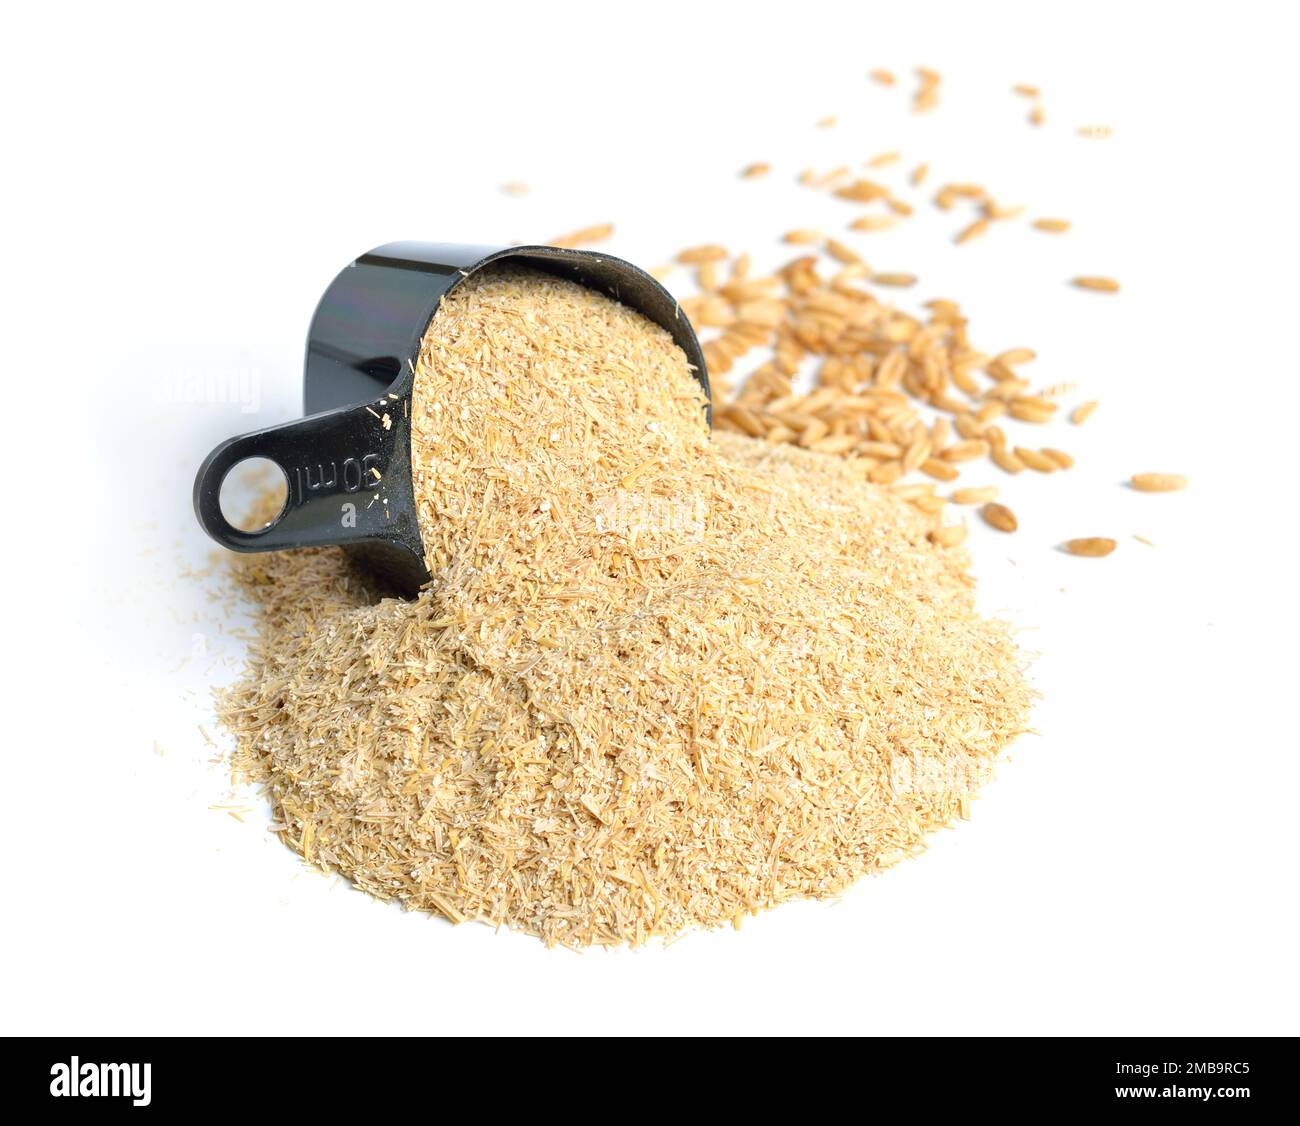 Oats miller's bran with grains isolated on white background Stock Photo